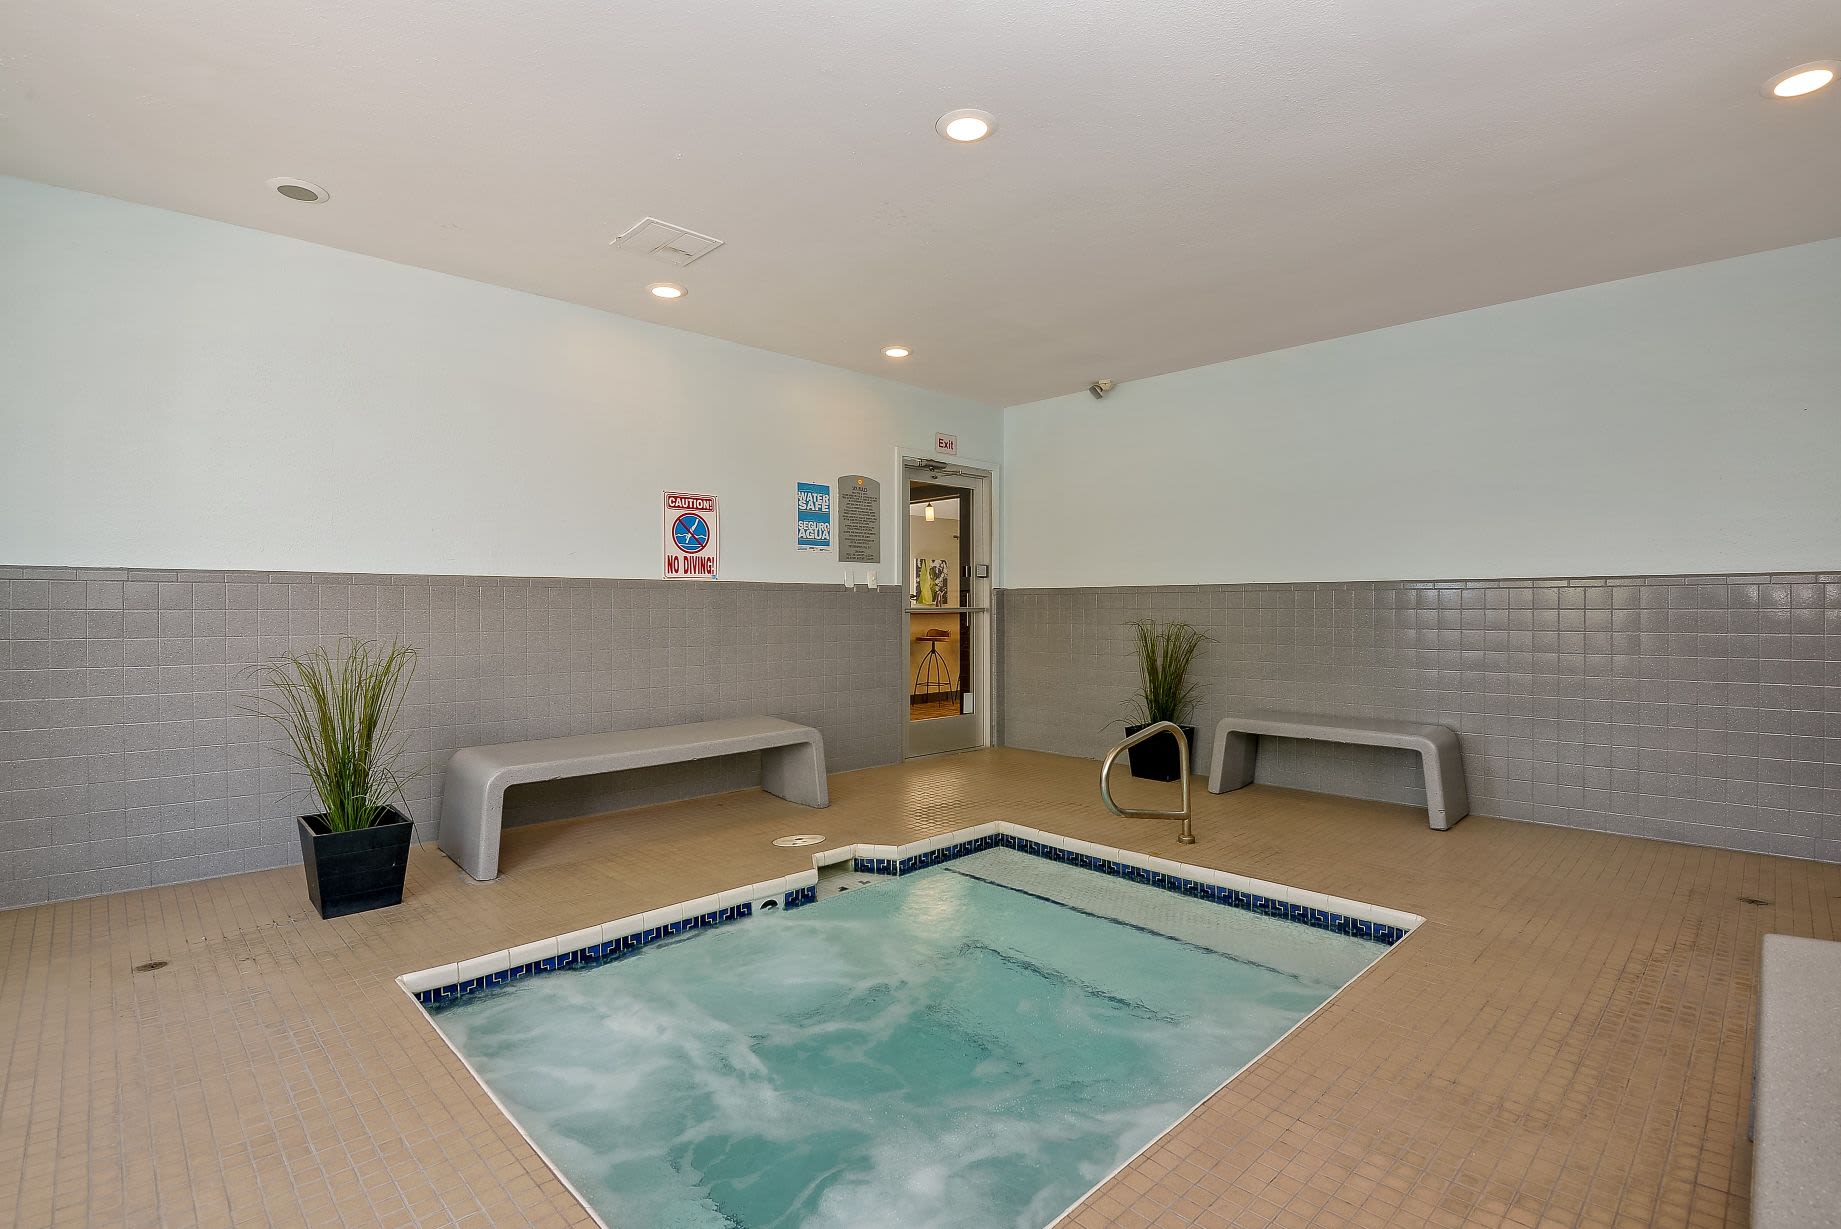 Hot tub at 505 West Apartment Homes in Tempe, Arizona